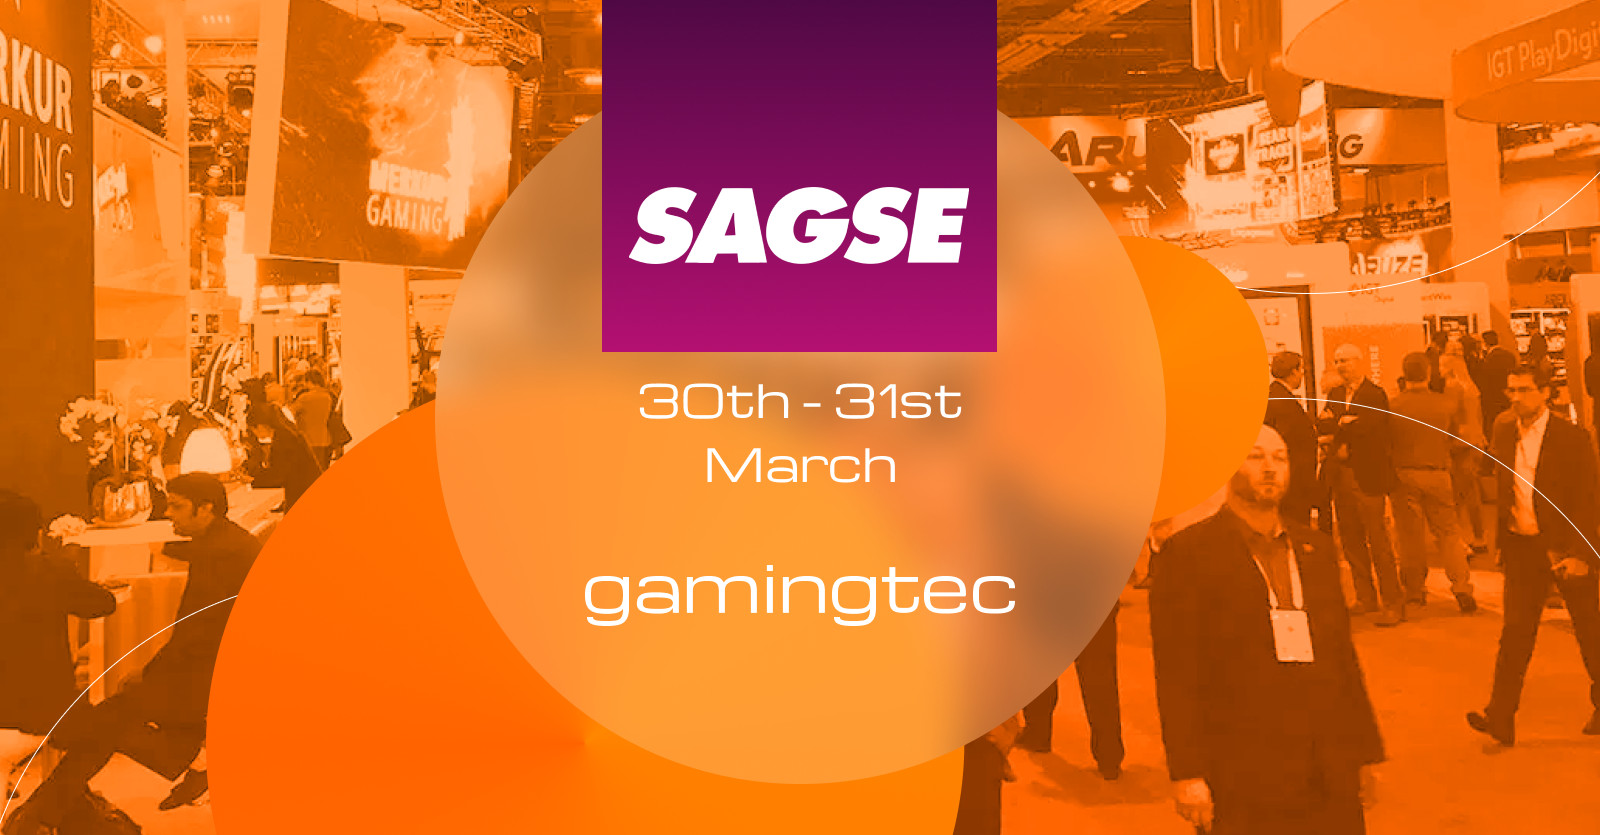 Gamingtec is exhibiting at SAGSE Argentina on the 30th-31st March